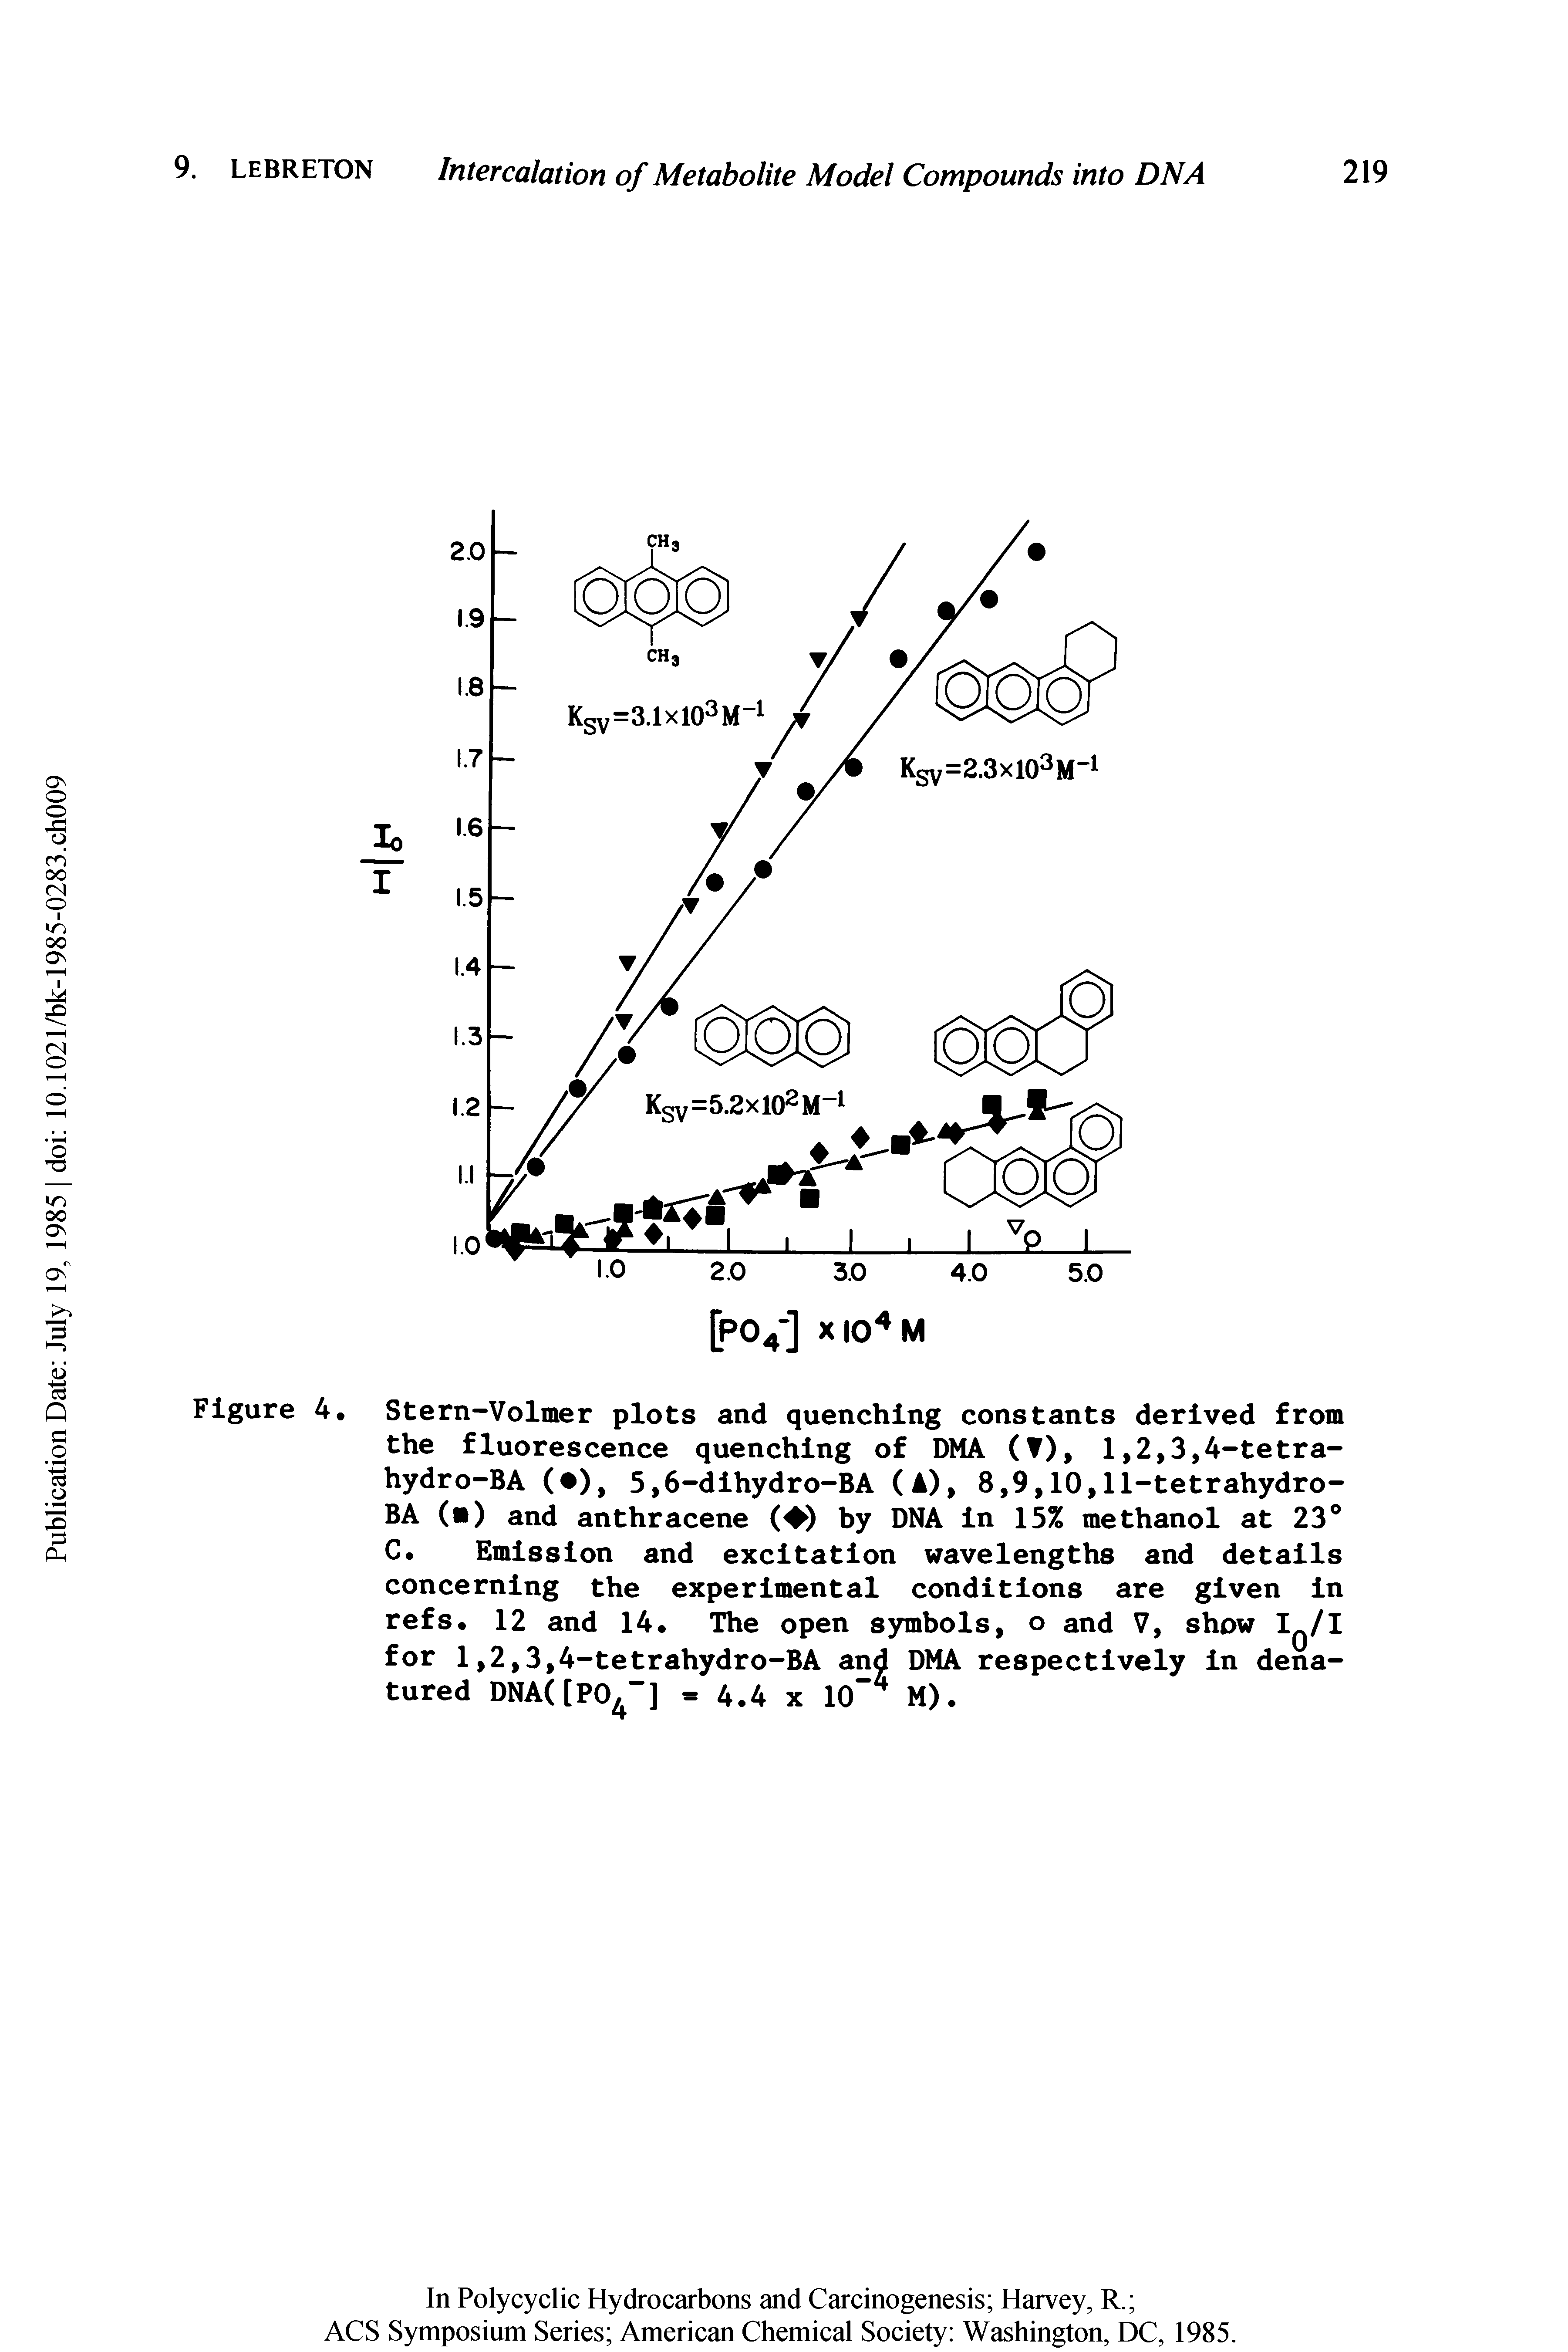 Figure 4. Stern-Volmer plots and quenching constants derived from the fluorescence quenching of DMA (T), 1,2,3,4-tetra-hydro-BA ( ), 5,6-dihydro-BA (A), 8,9,10,11-tetrahydro-BA ( ) and anthracene ( ) by DNA in 15% methanol at 23° C. Emission and excitation wavelengths and details concerning the experimental conditions are given in refs. 12 and 14. The open symbols, o and V, show I /I for 1,2,3,4-tetrahydro-BA and DMA respectively in denatured DNA([P04"] 4.4 x 10 4 M).